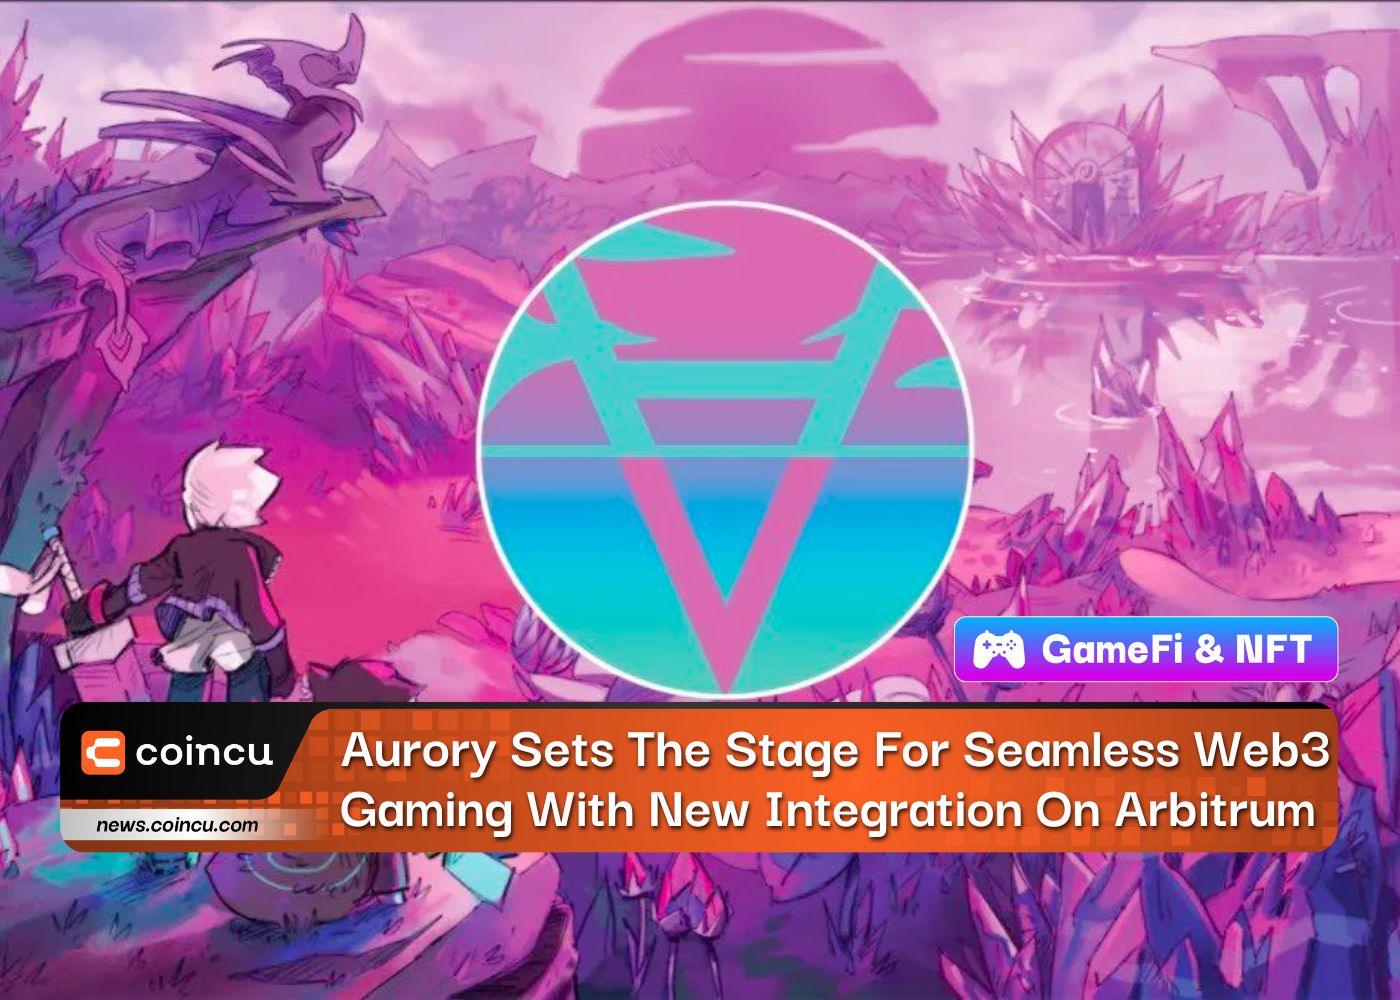 Aurory Sets The Stage For Seamless Web3 Gaming With New Integration On Arbitrum